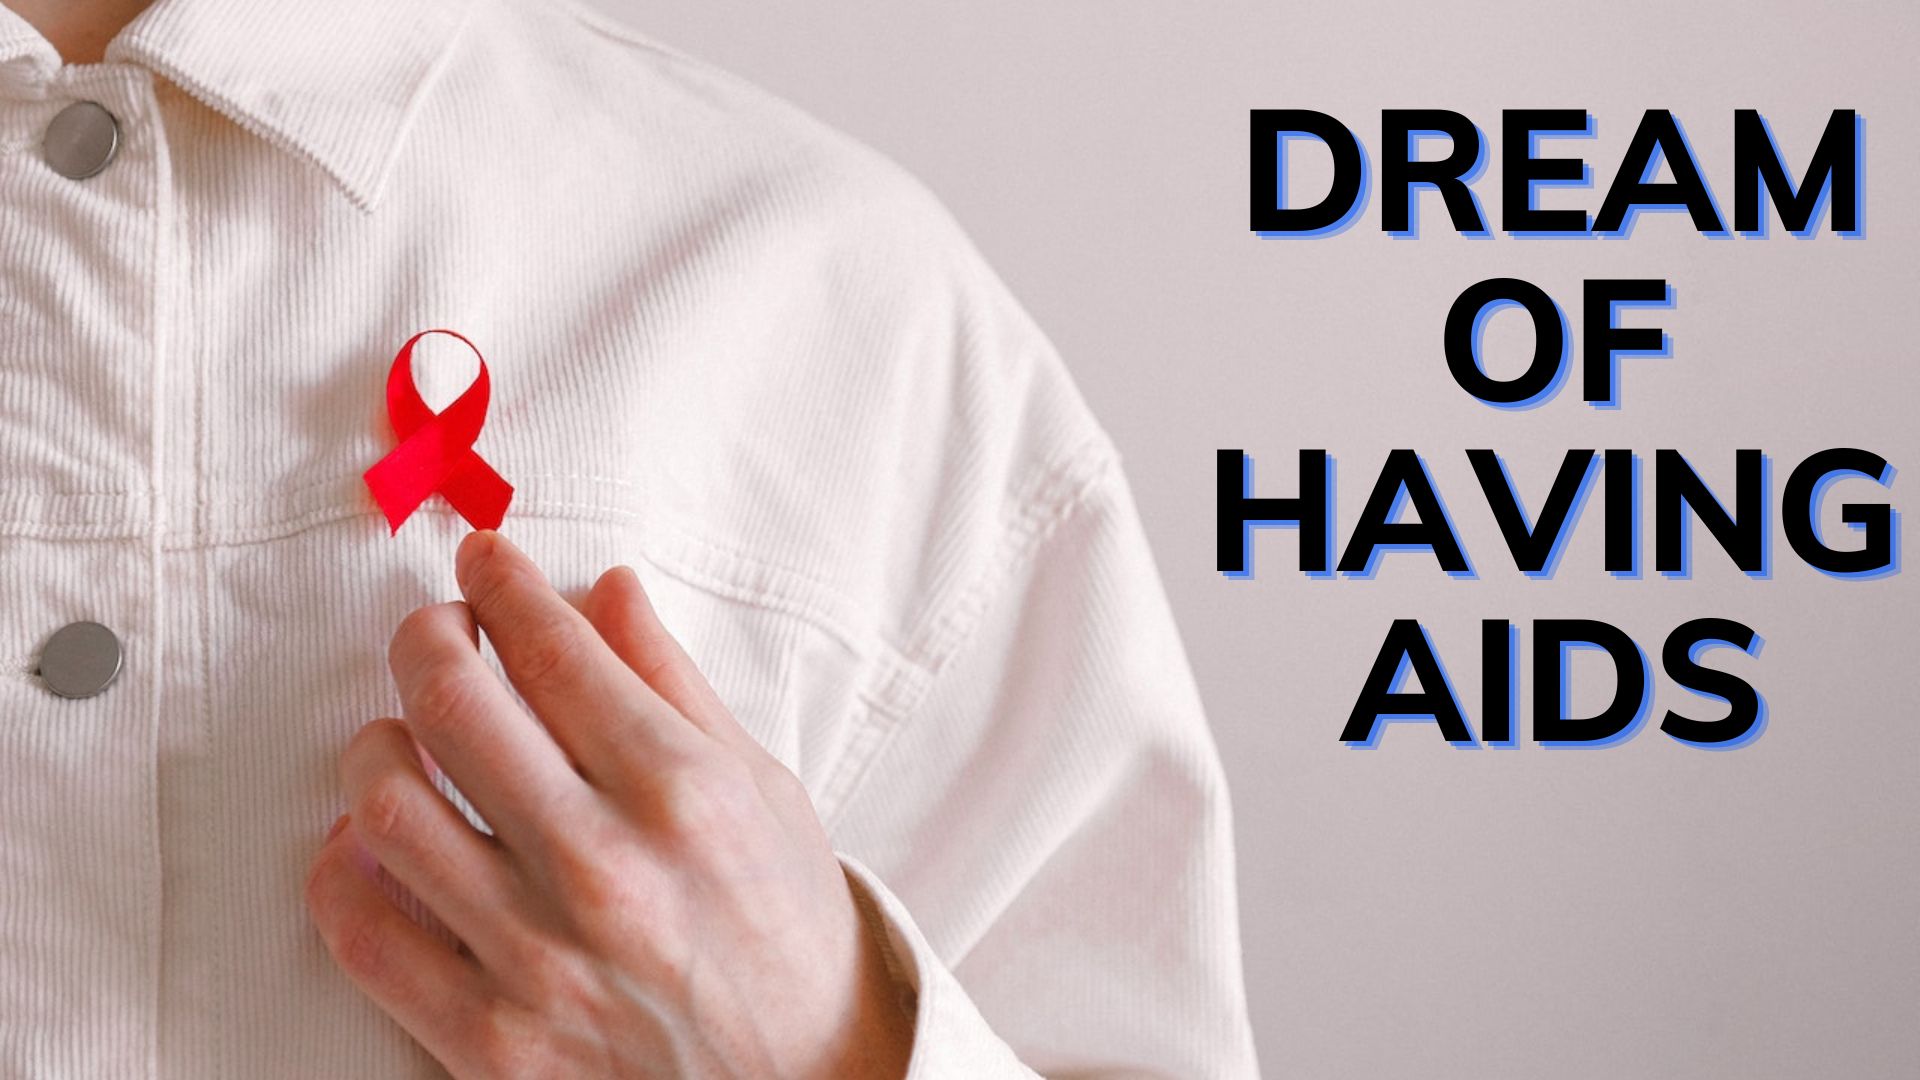 Dream Of Having AIDS - A Sign Of Regrets Over Past Decisions